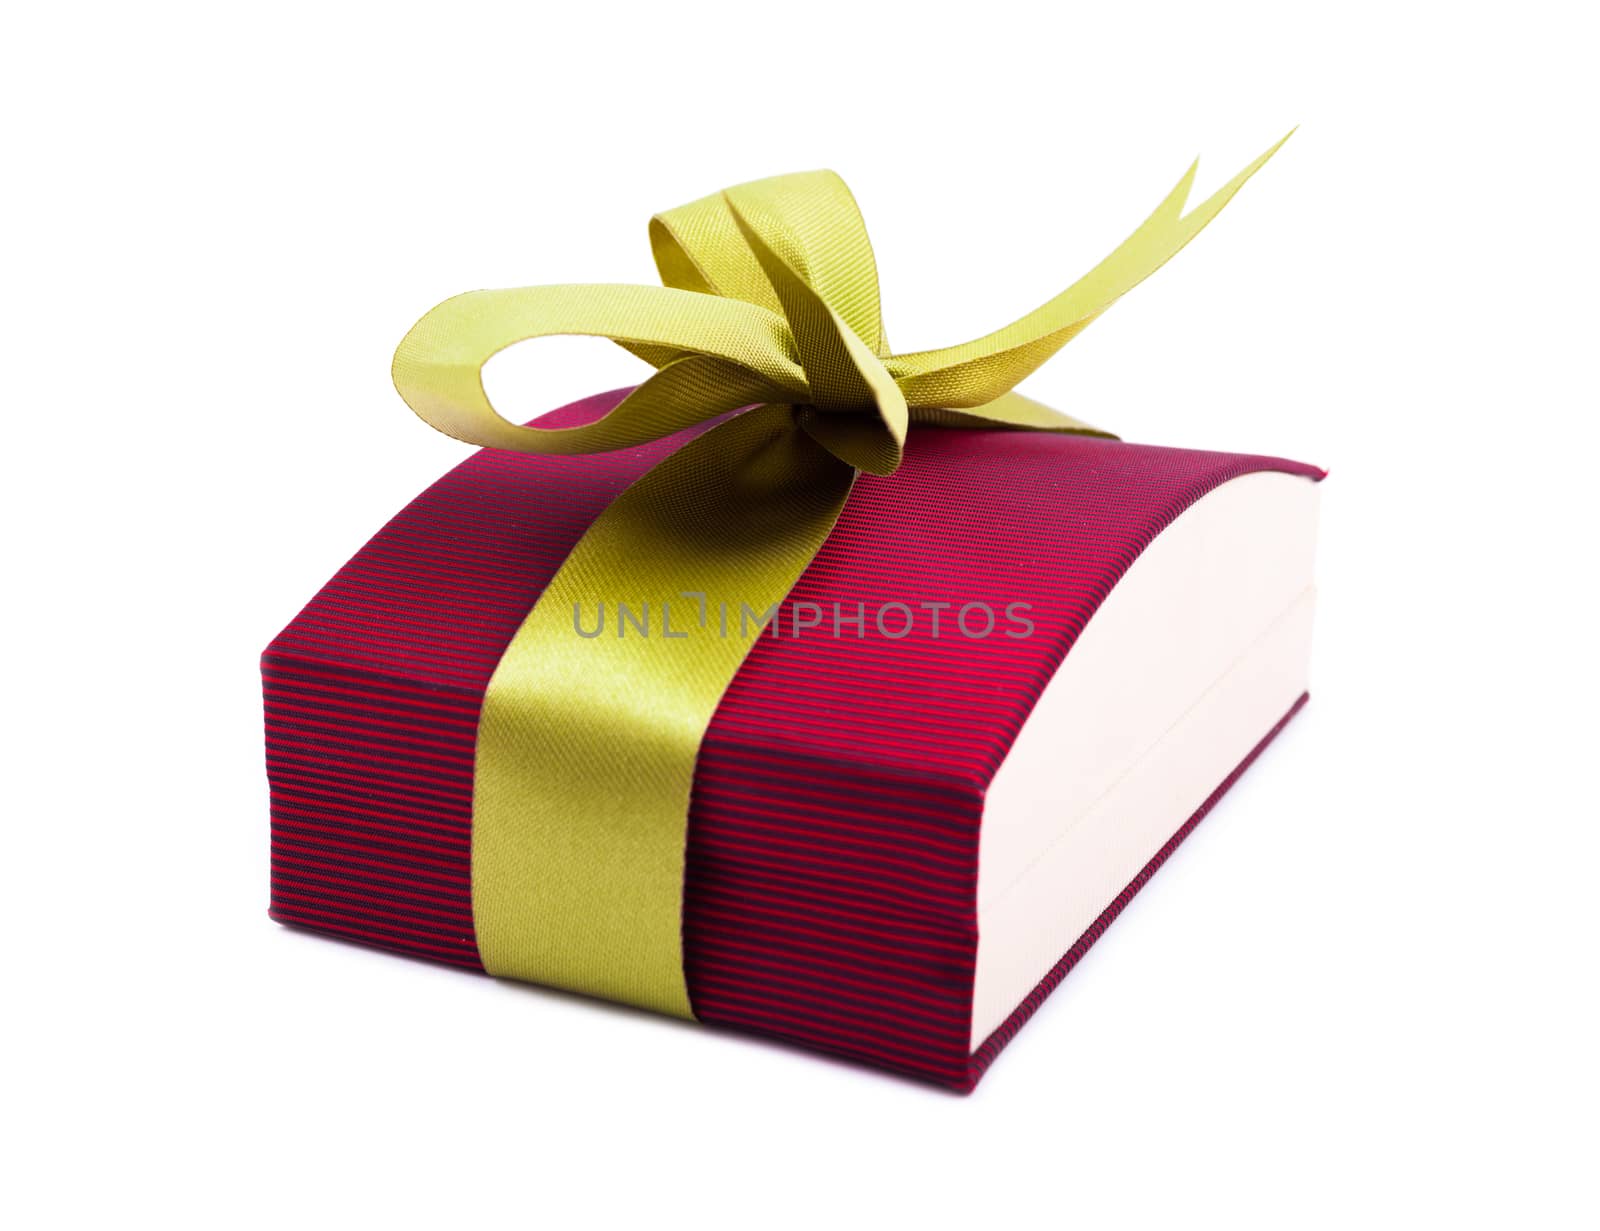 Luxury gift box in dark red shades with green satin ribbon and bow isolated over white background.